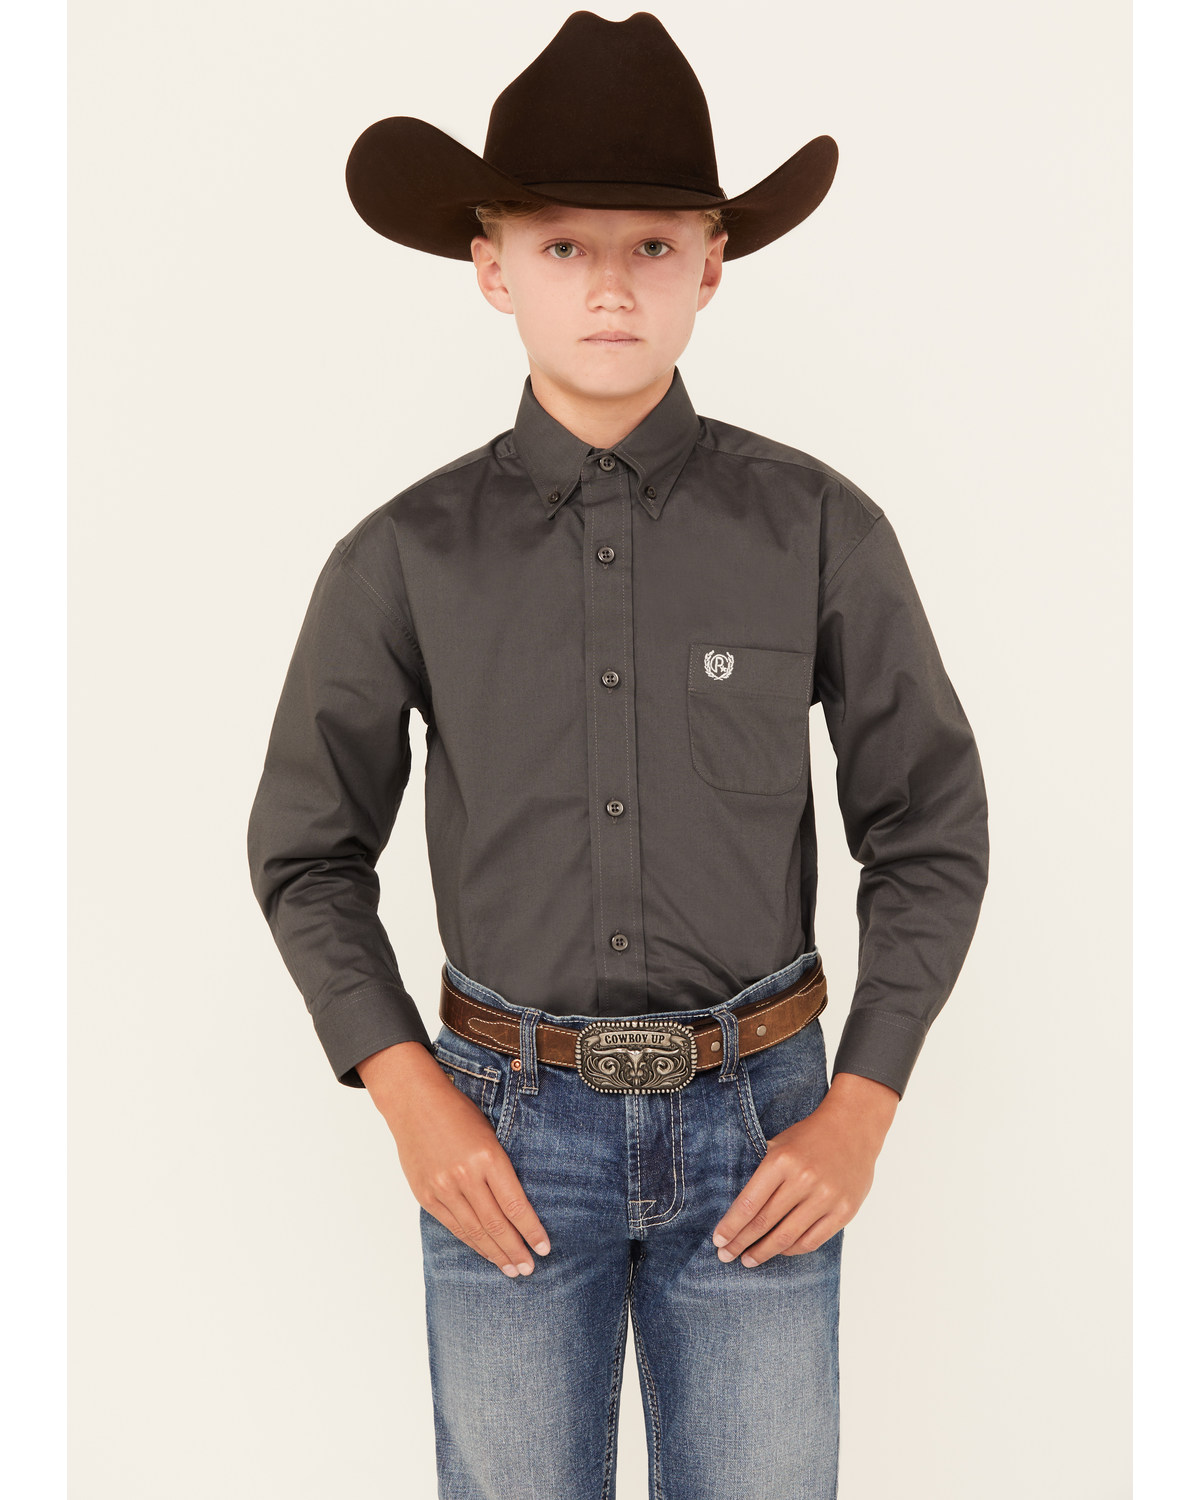 Panhandle Boys' Solid Long Sleeve Button-Down Stretch Western Shirt